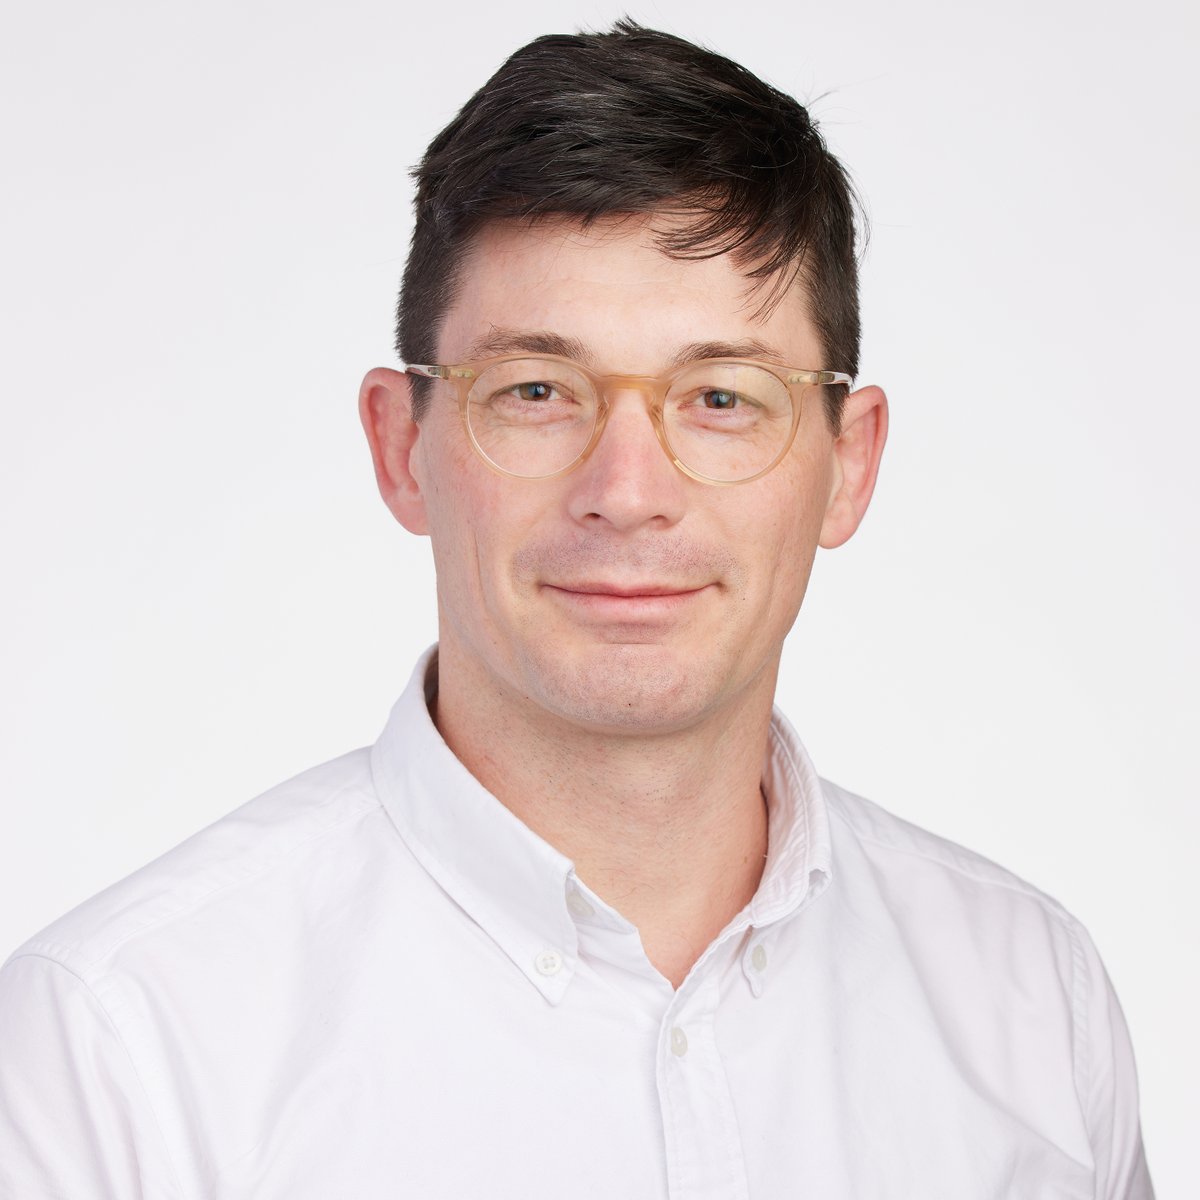 ✨CONGRATULATIONS to Dr Matthew Perkins @glassesmolasses on his appointment to Instructor! Dr Perkins investigates how the brain constructs neural representations of the internal body w/ specific interest in how distinct motivational states emerge from internal organ function.👏